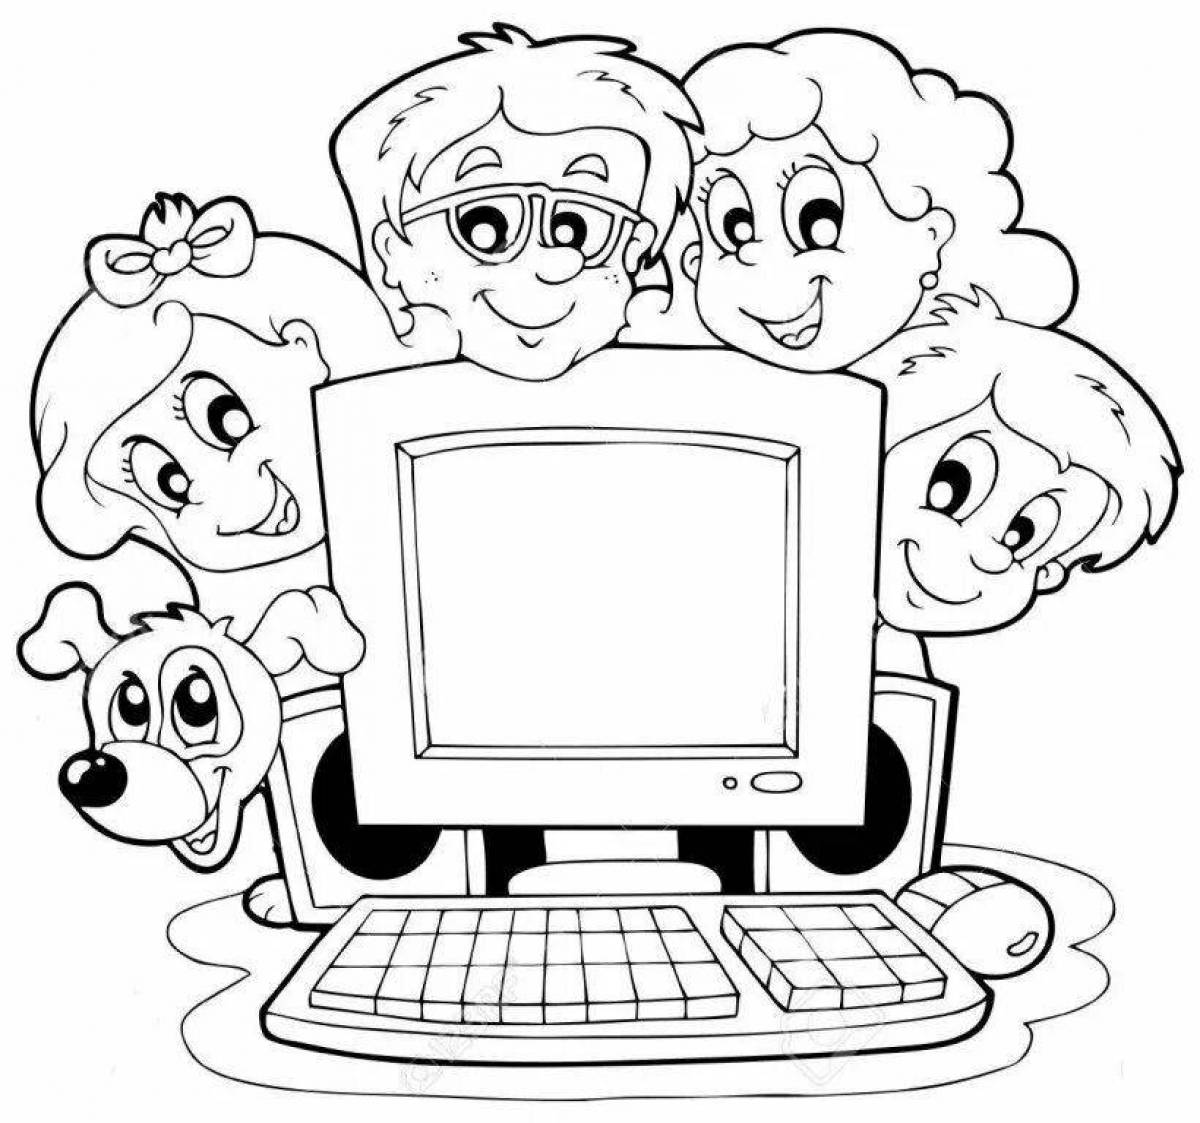 Funny internet security coloring page